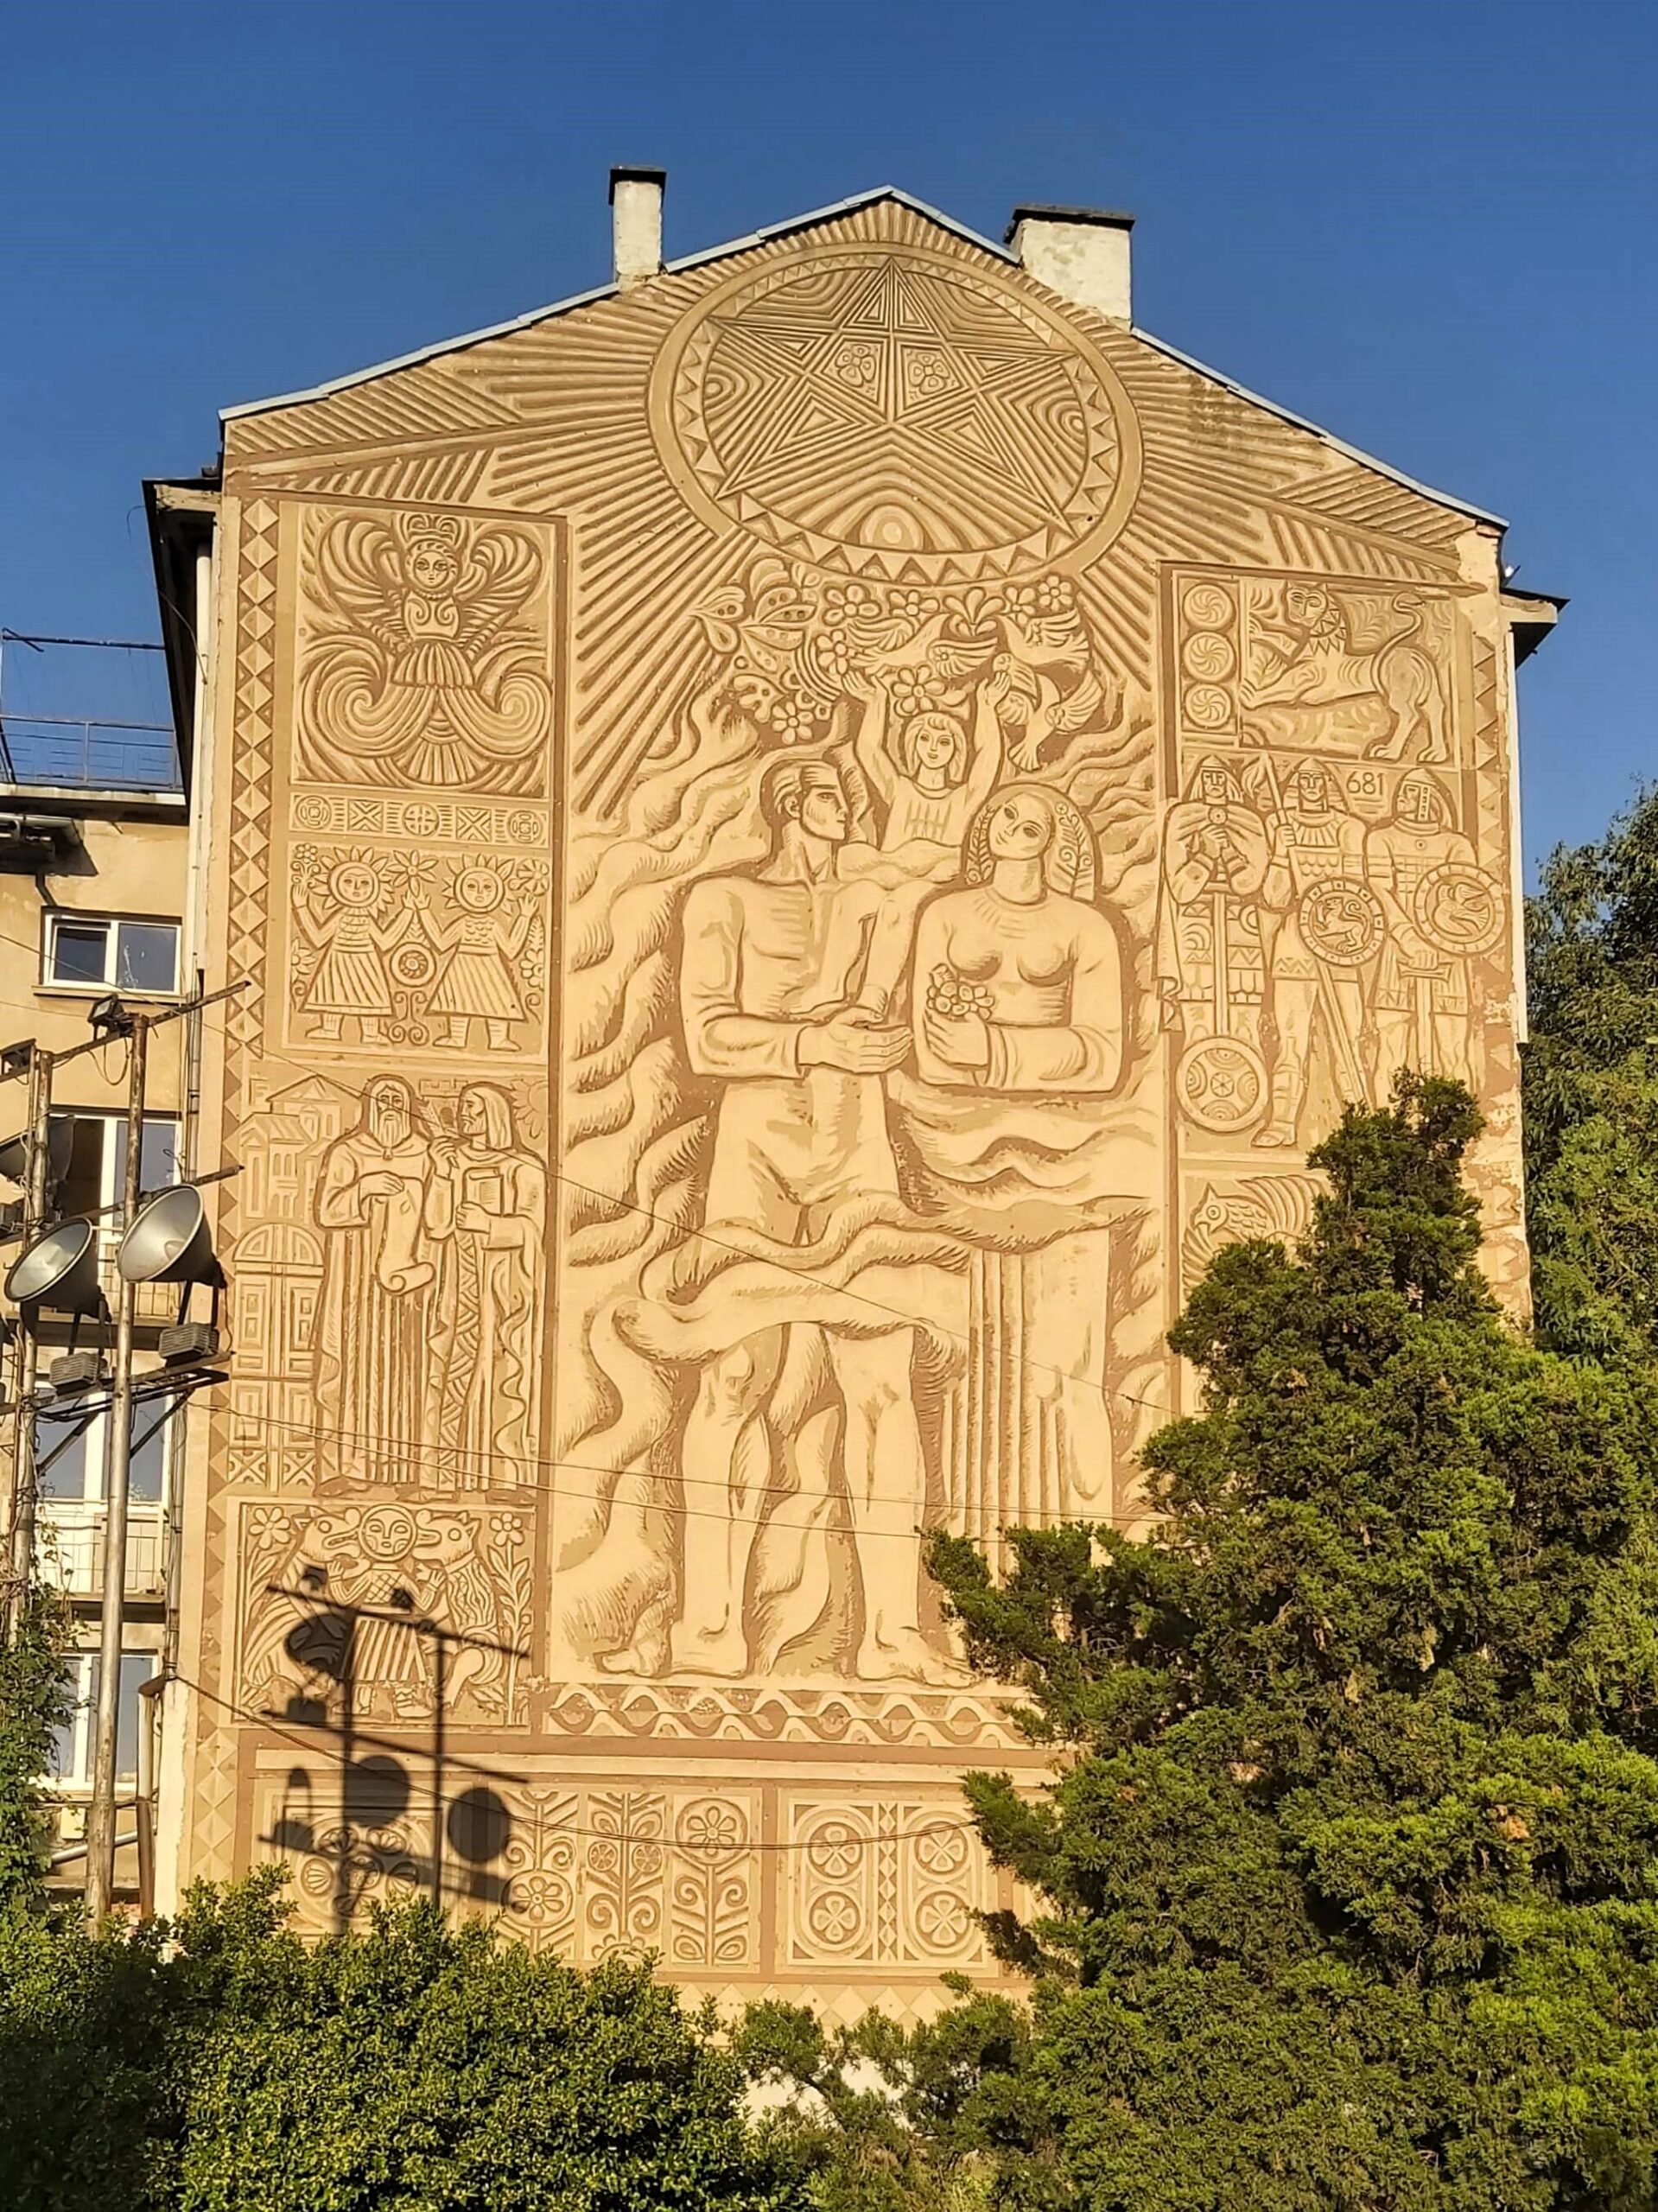 Art on side of building in Ruse, Bulgaria